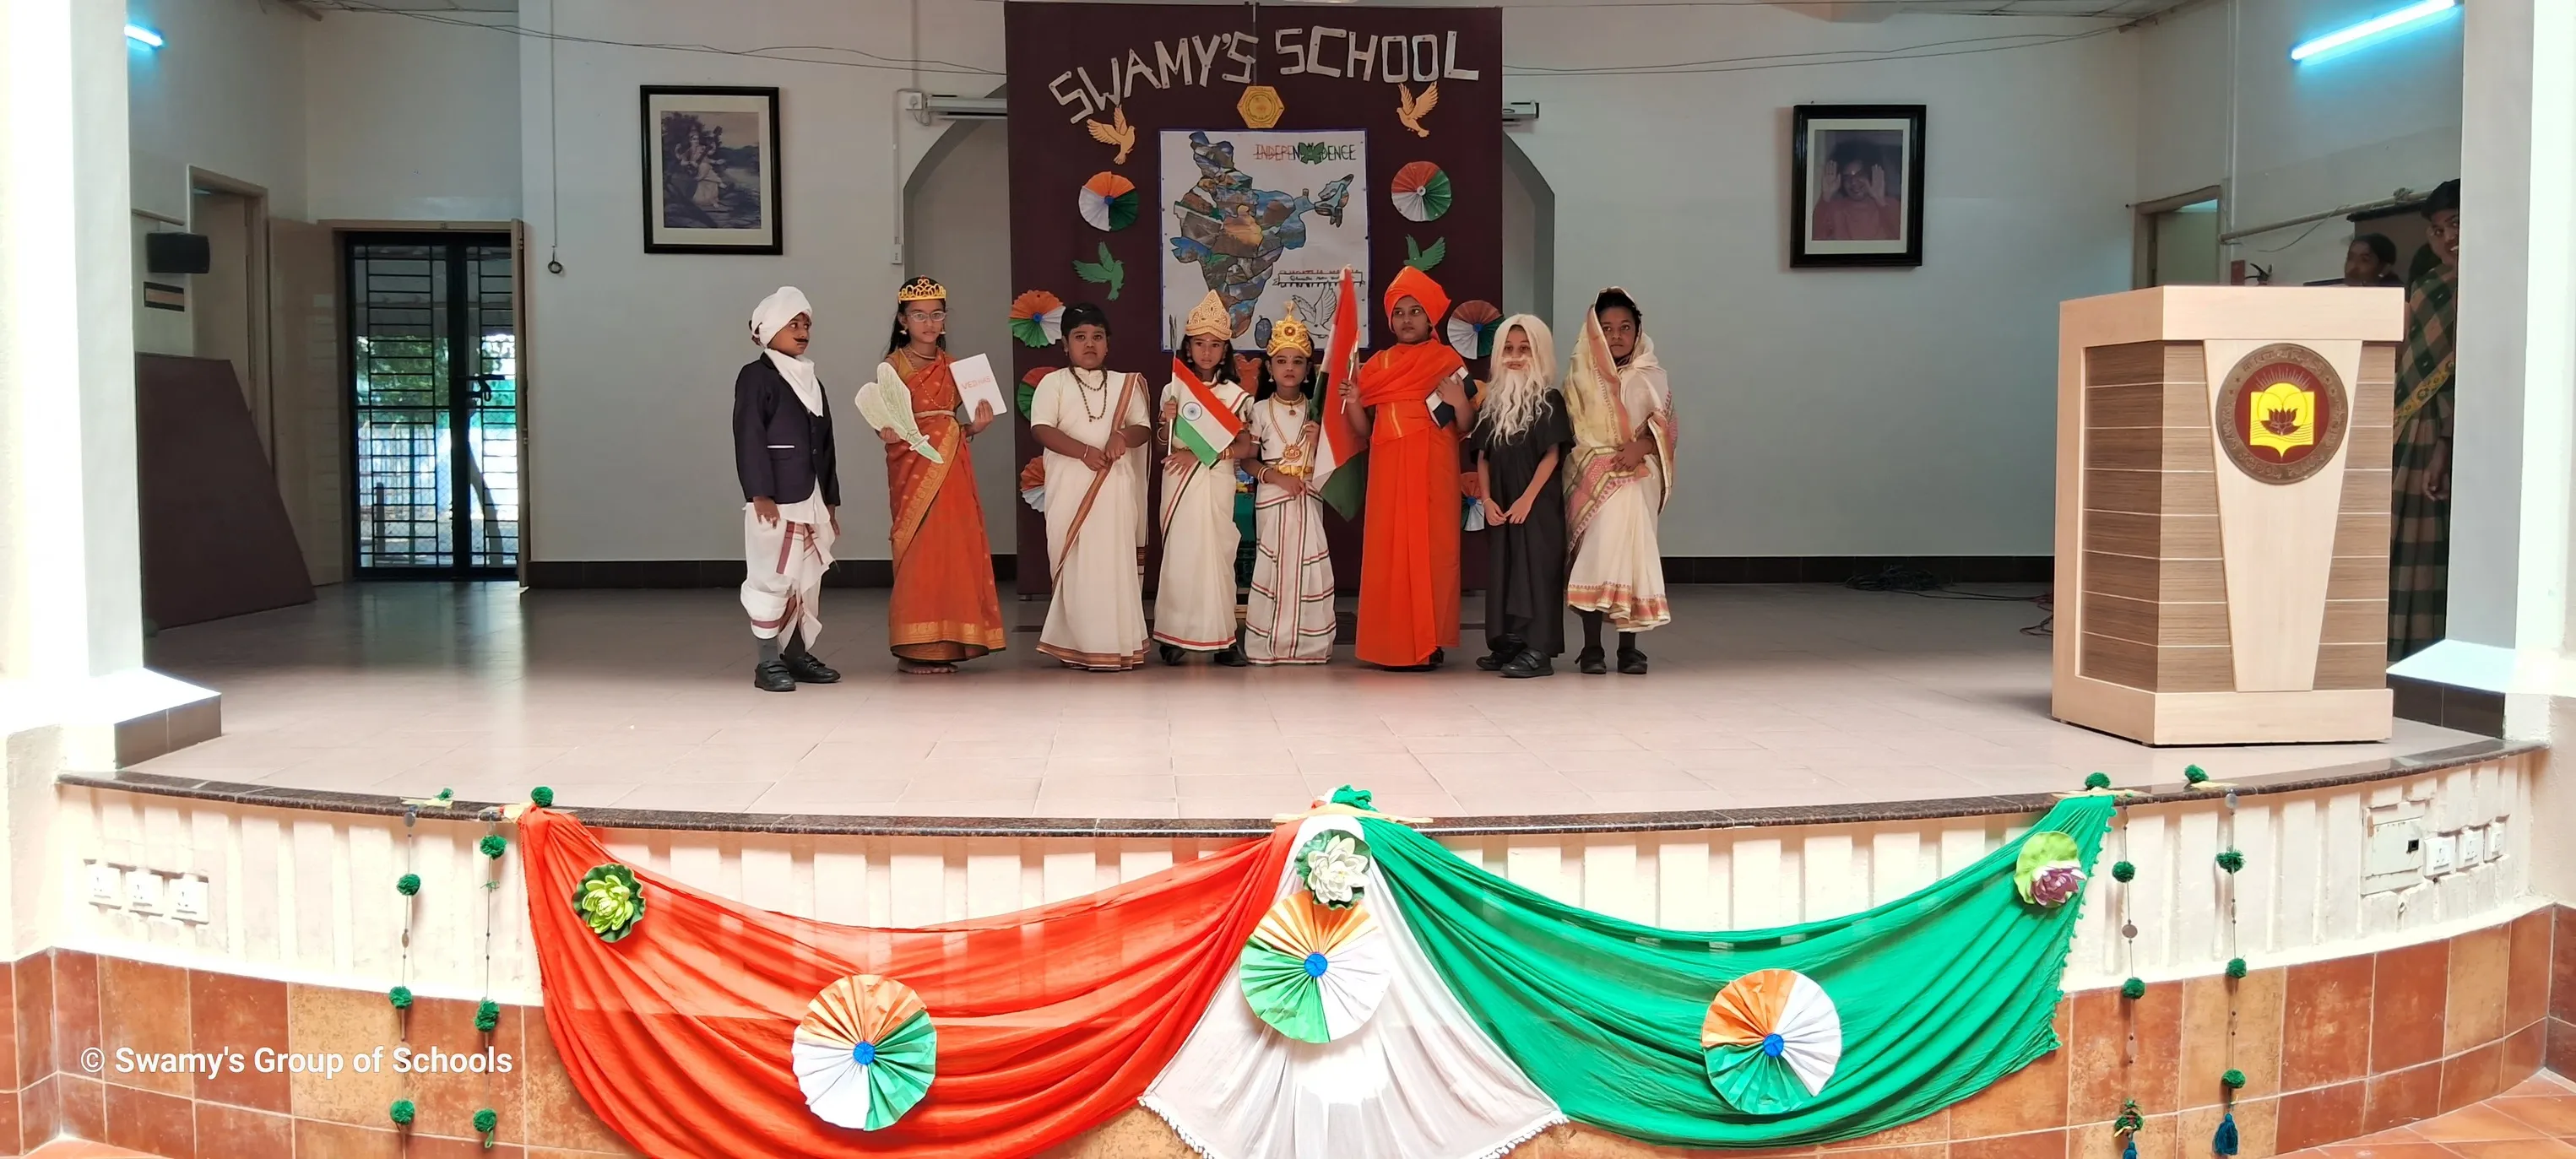 The students put on a patriotic performance in which they portrayed the roles of various patriotic leaders